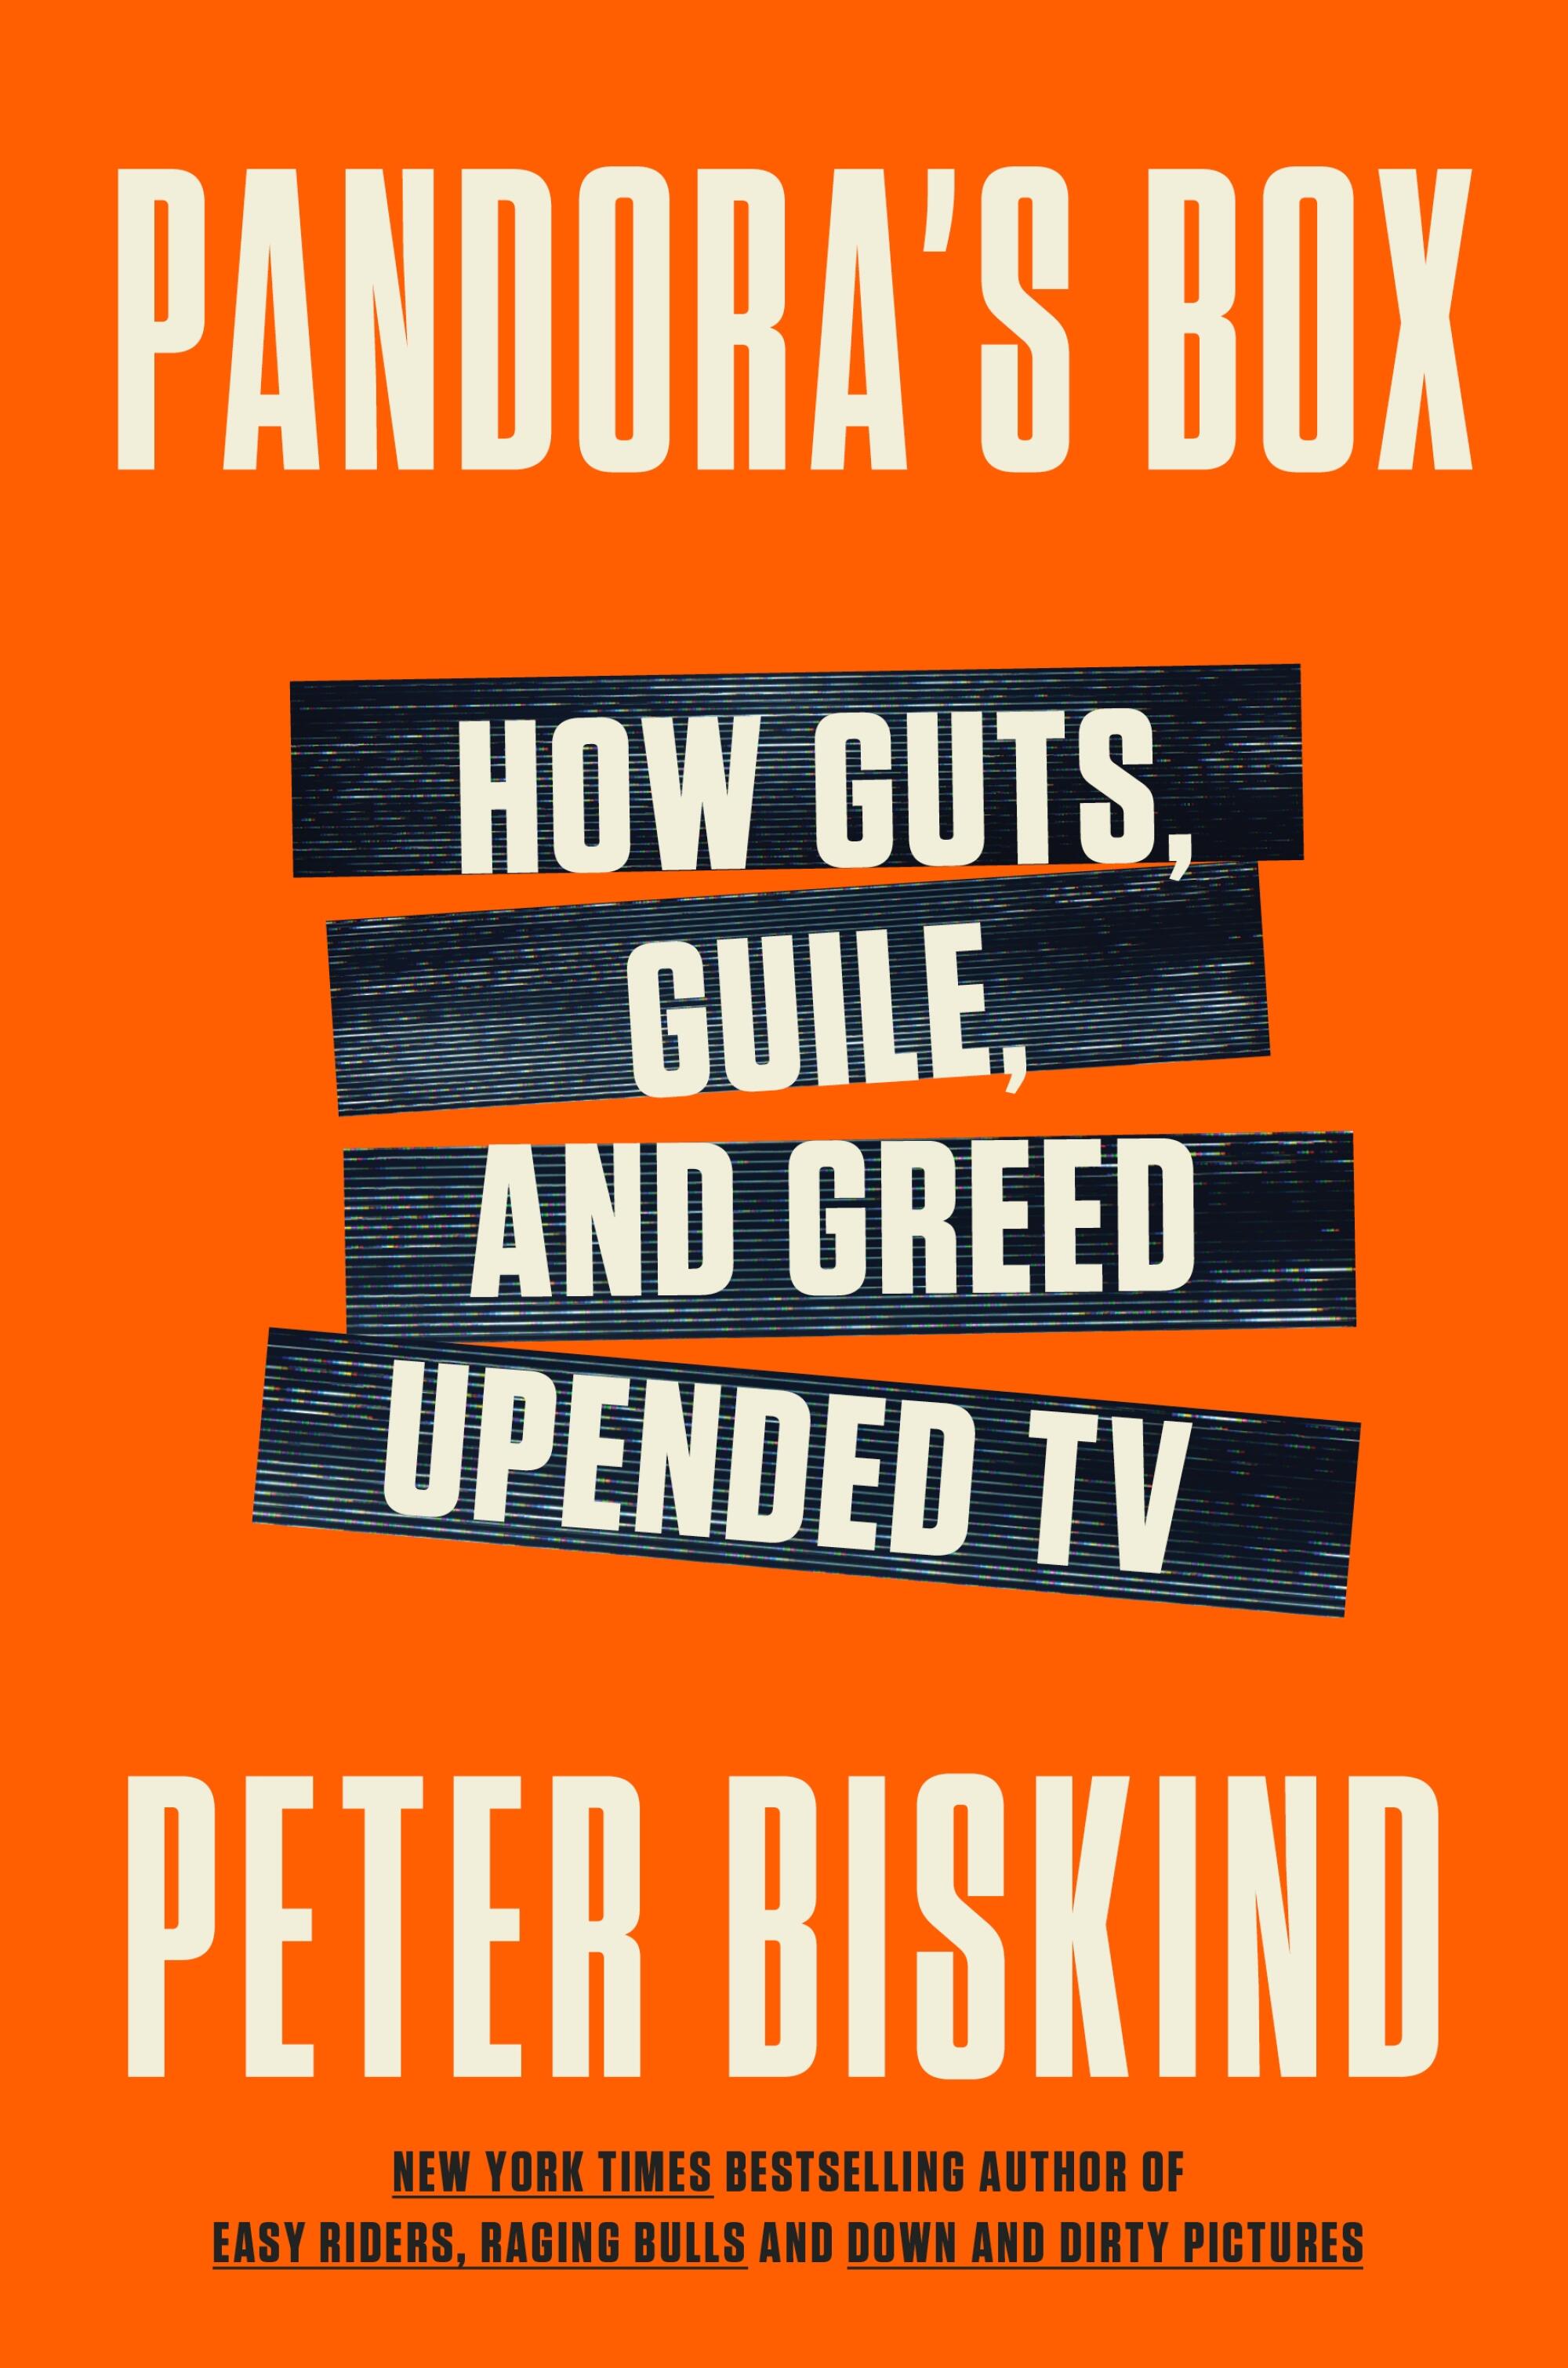 Book cover of "Pandora's Box" by Peter Biskind